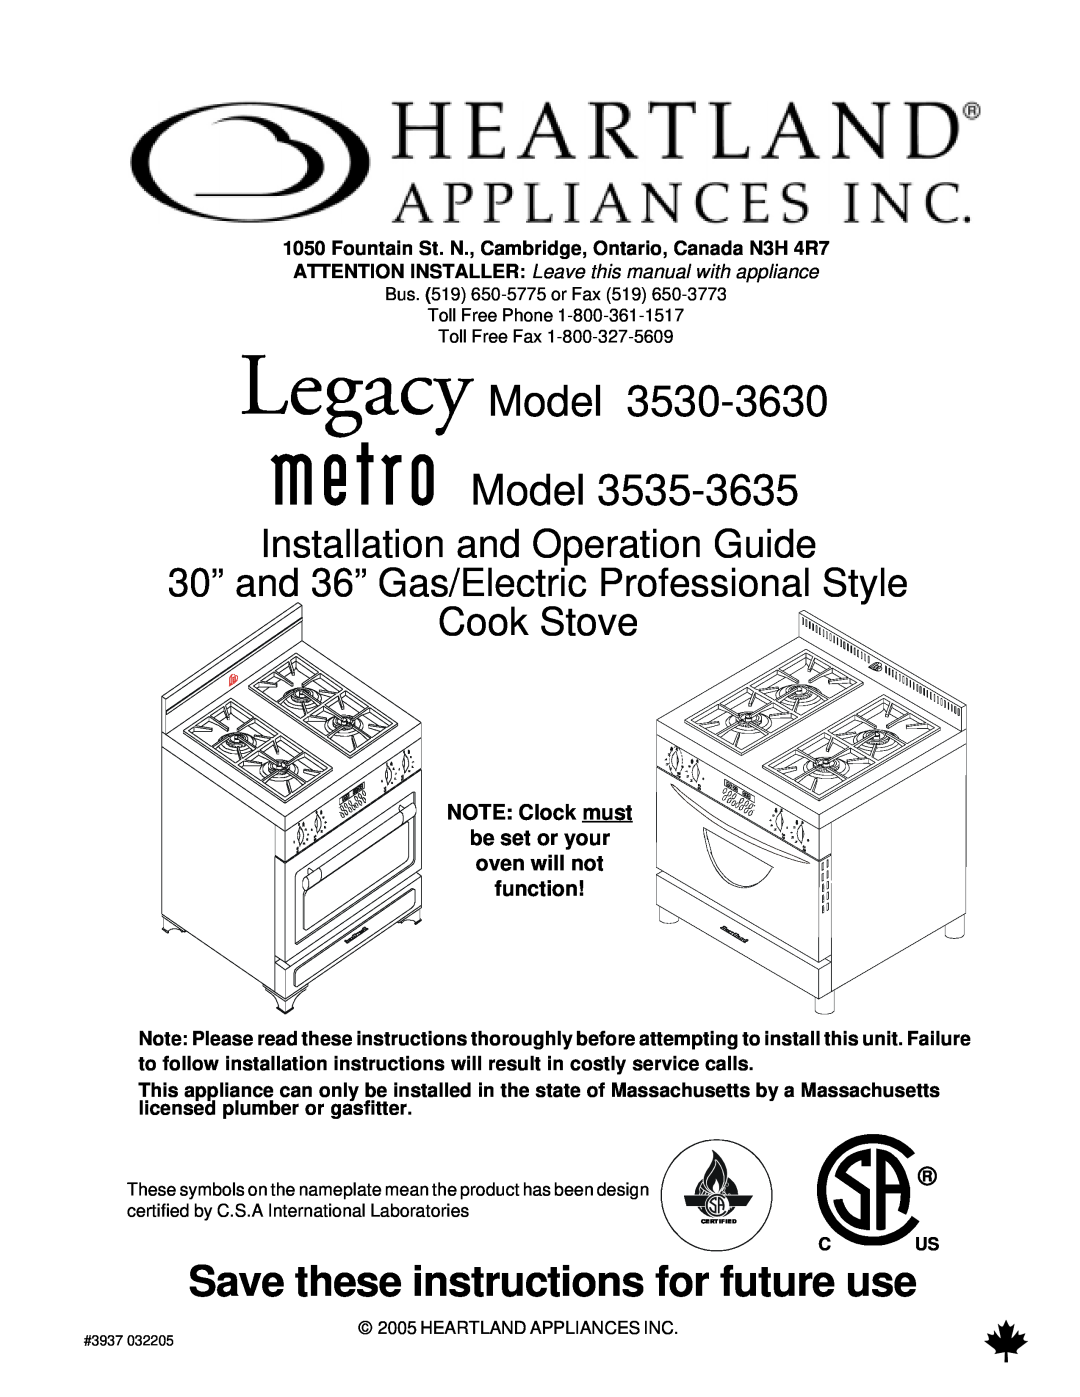 Heartland 3530, 3630 installation and operation guide Save these instructions for future use, Model Model, Cook Stove 